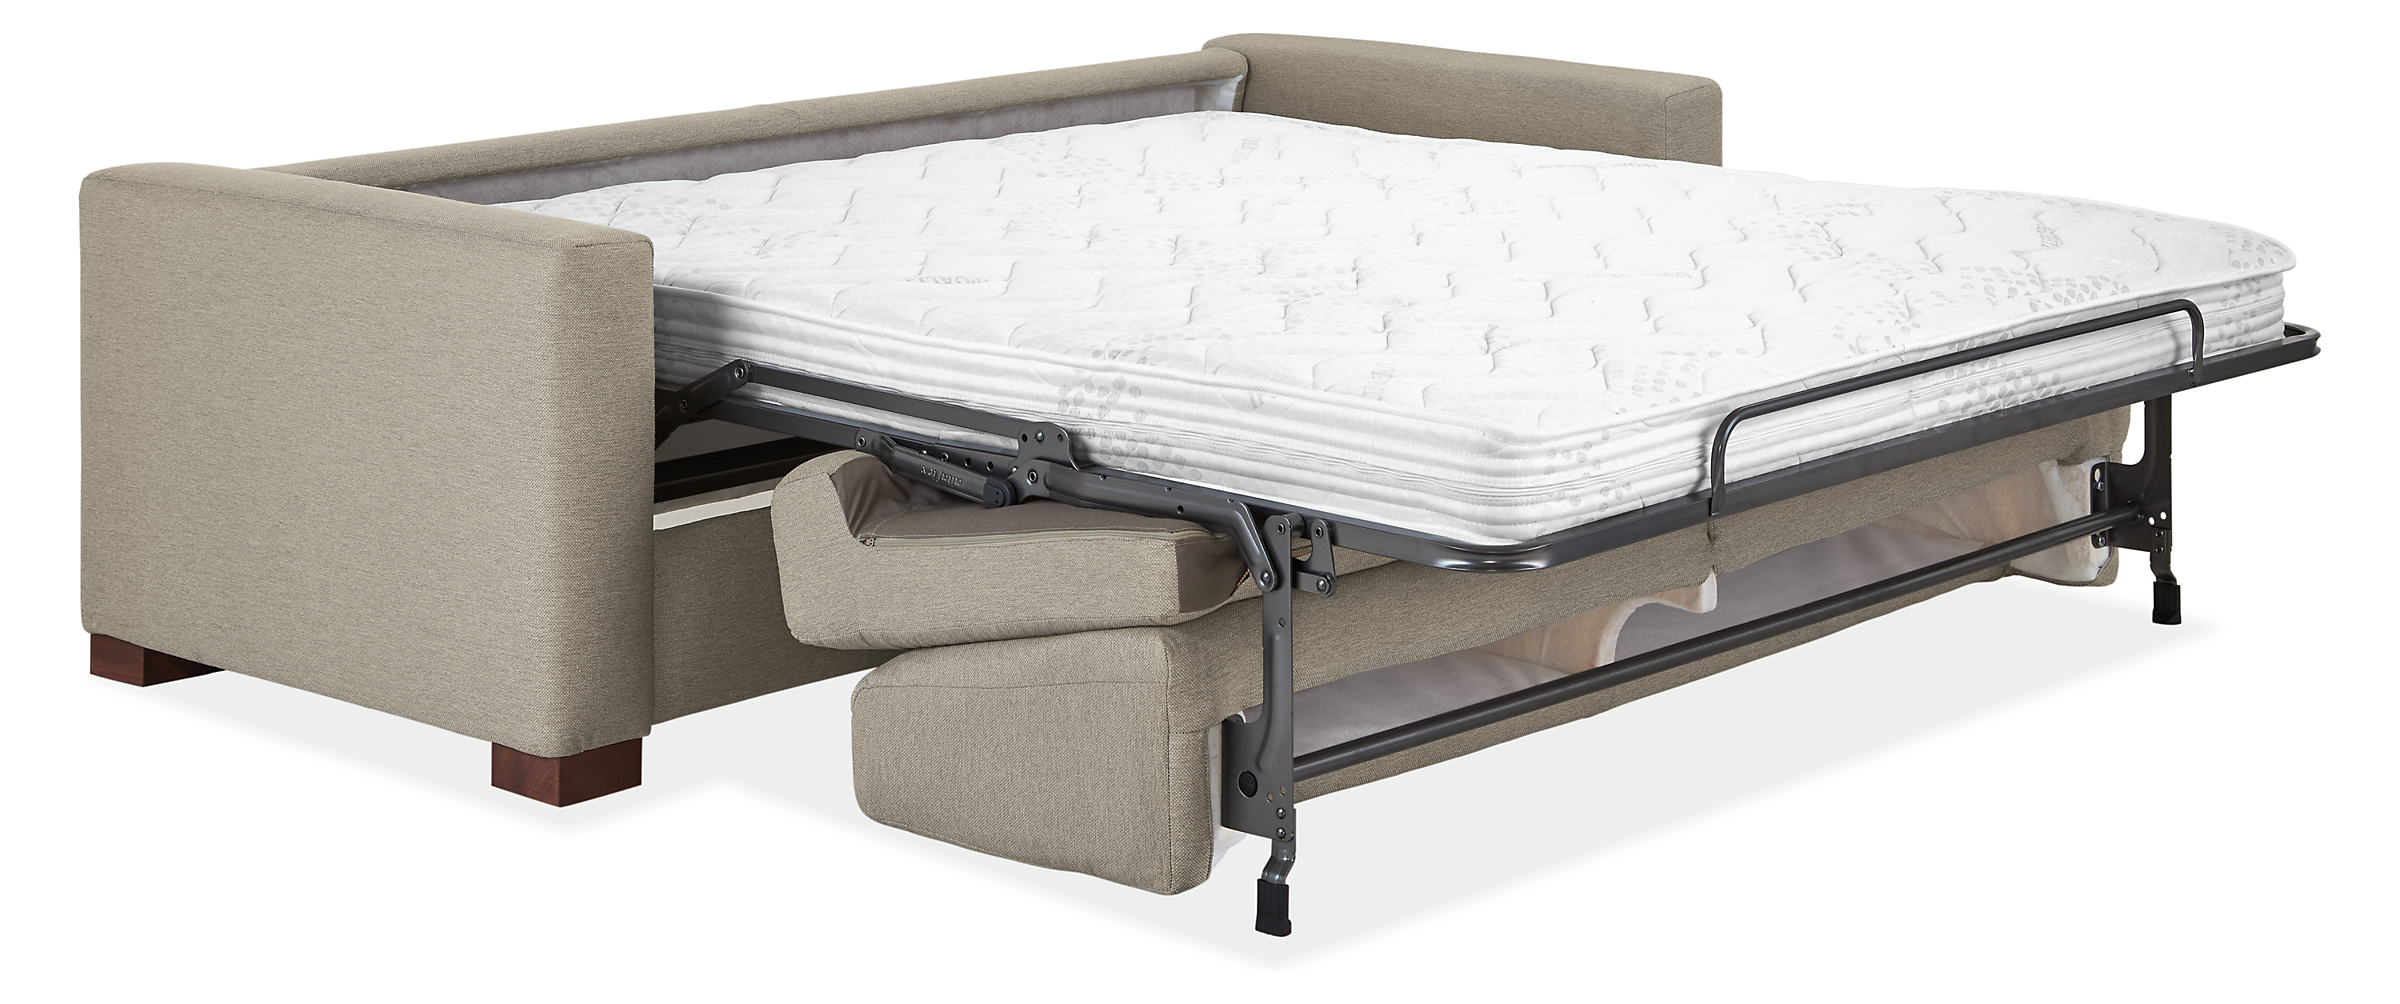 angled view of viva 86-wide fold-out sleeper sofa fully extended to reveal mattress.